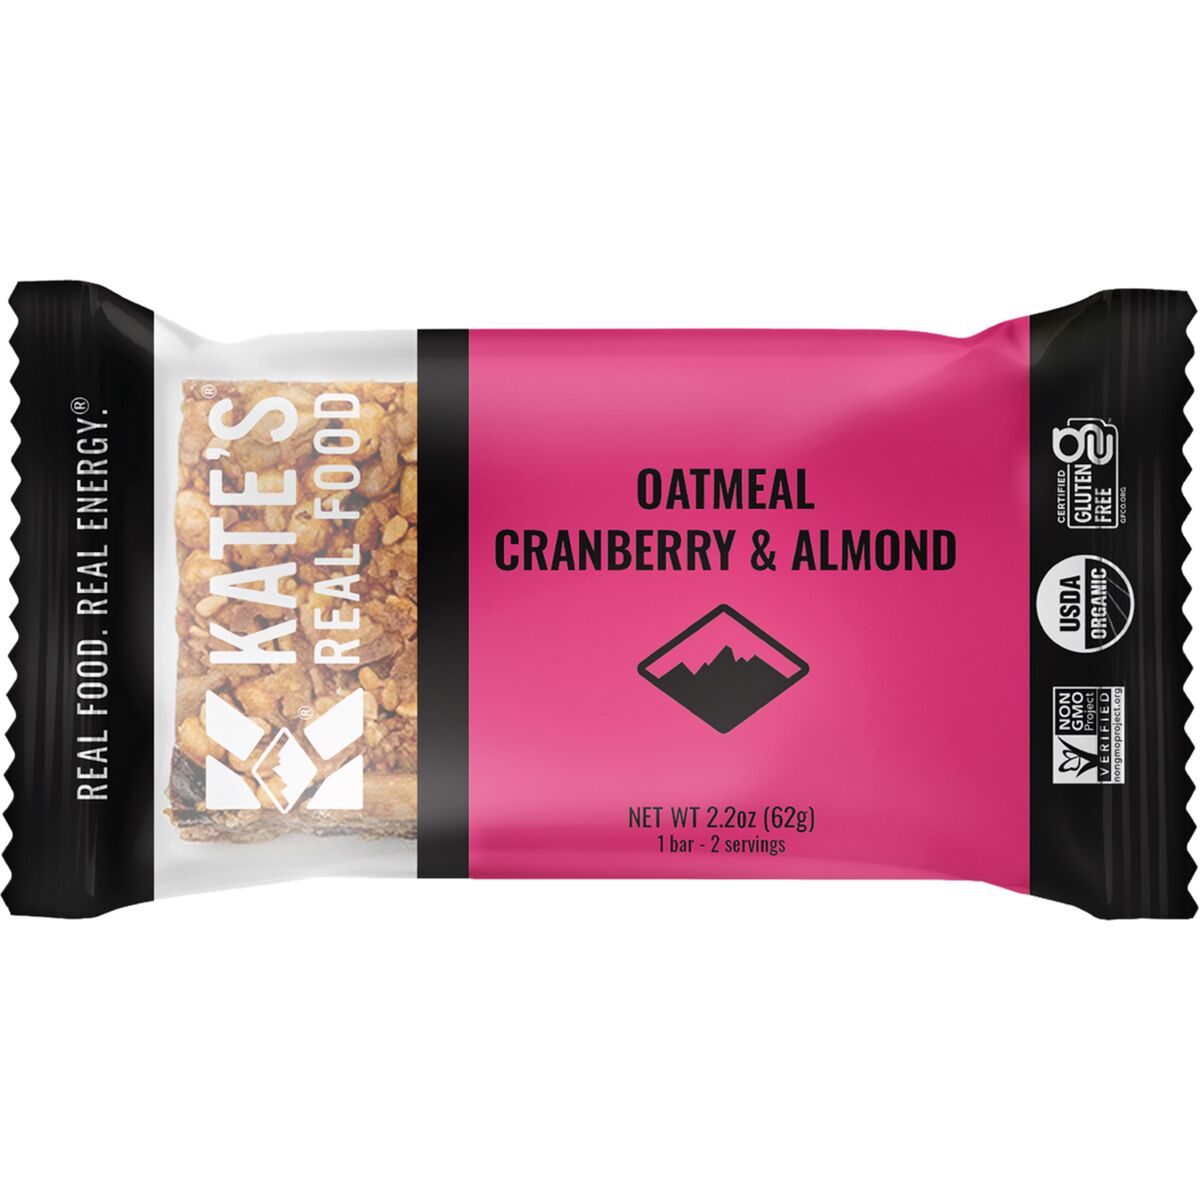 Kate's Real Food Oatmeal Cranberry & Almond Bars - 6-Pack